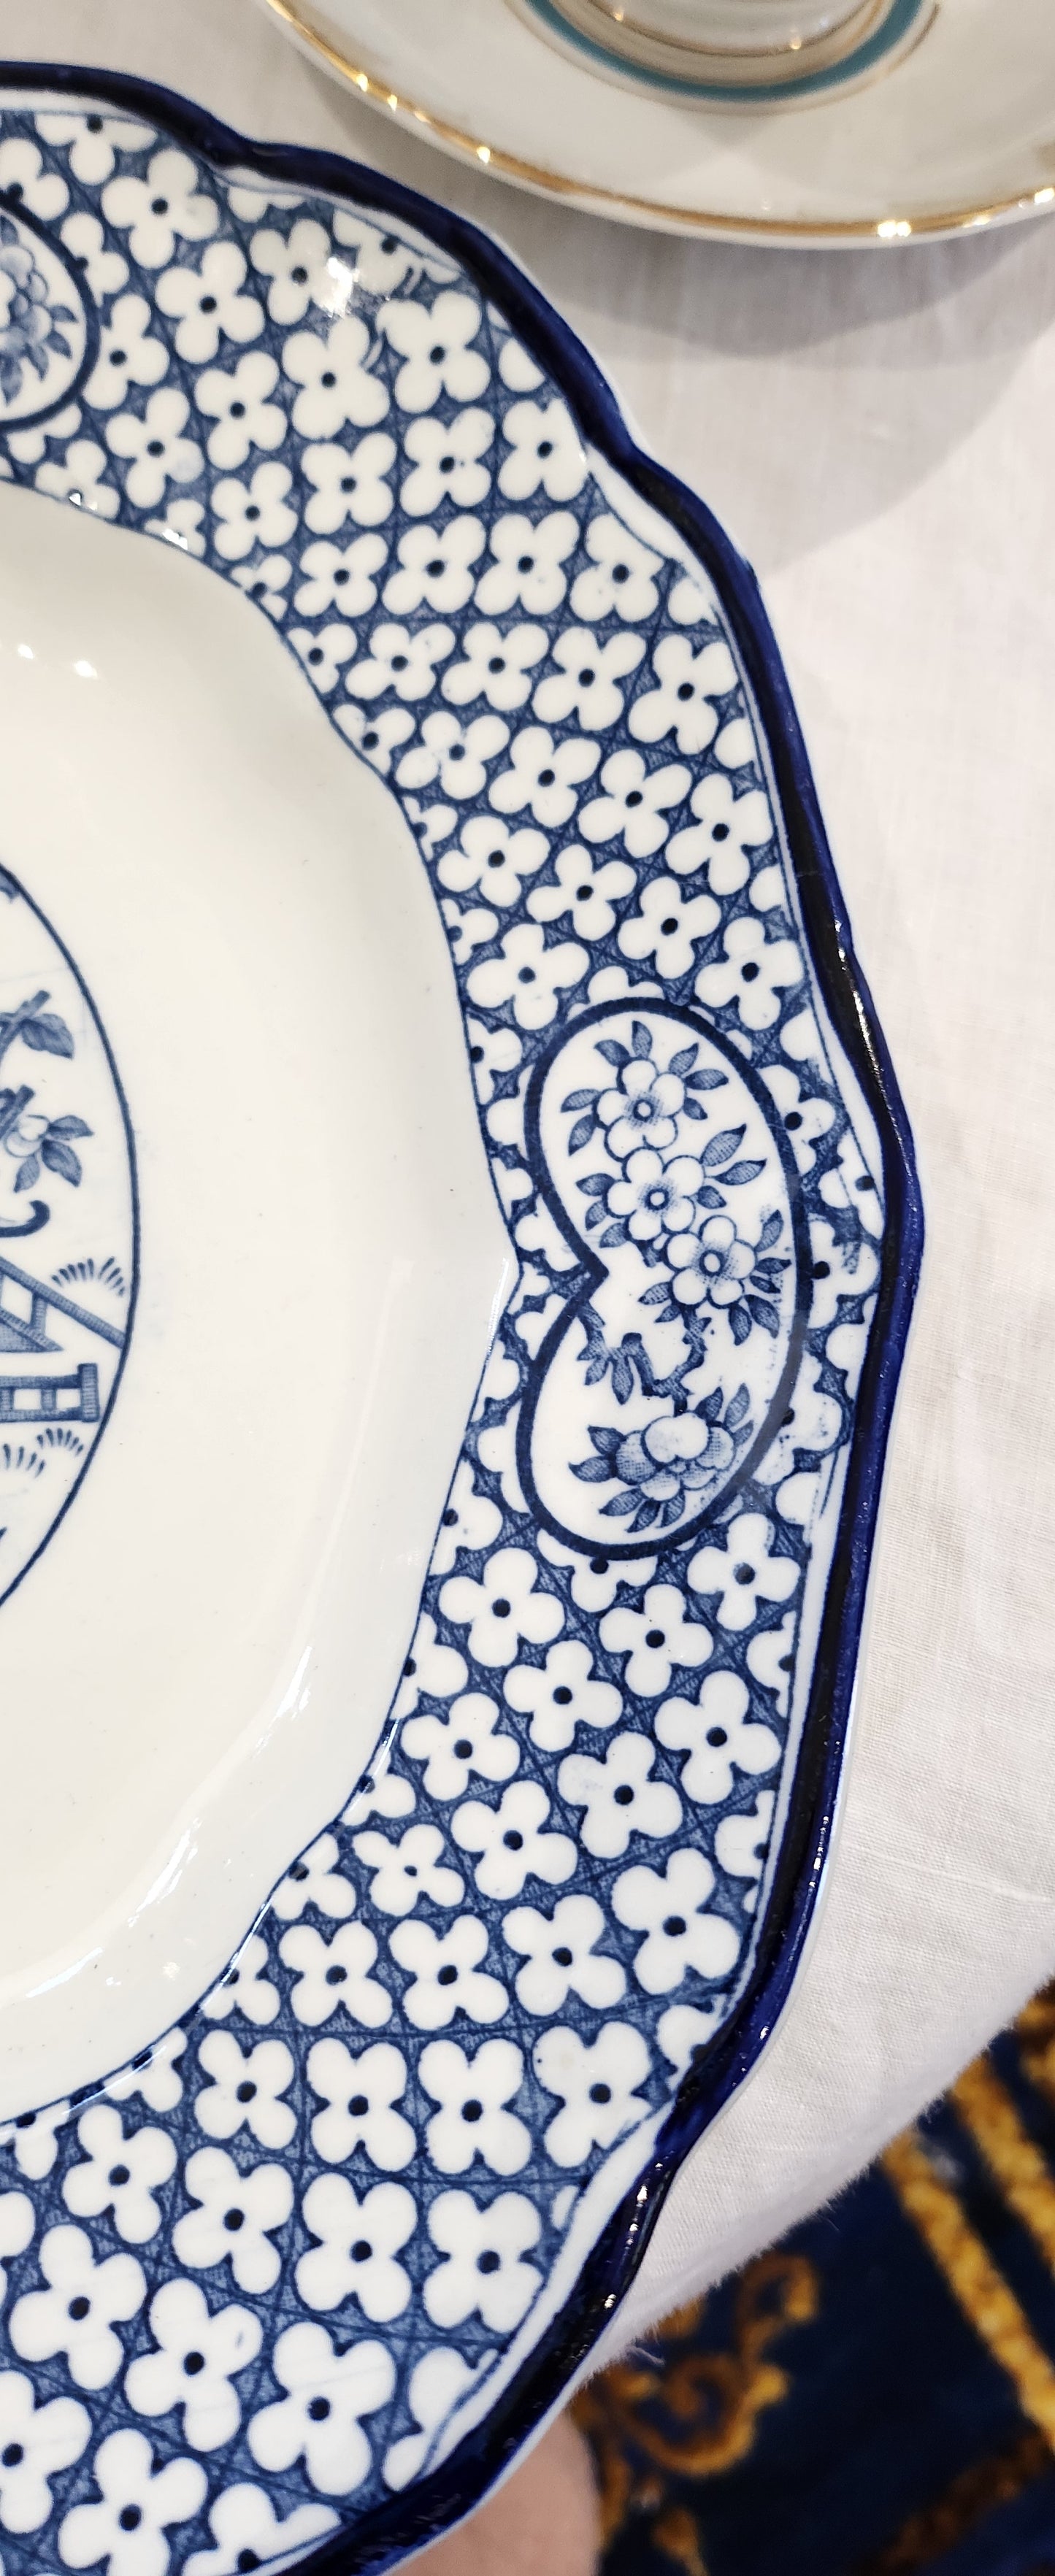 BIG blue and white platter by 'Orient' 'H.H & Co Ltd England'.